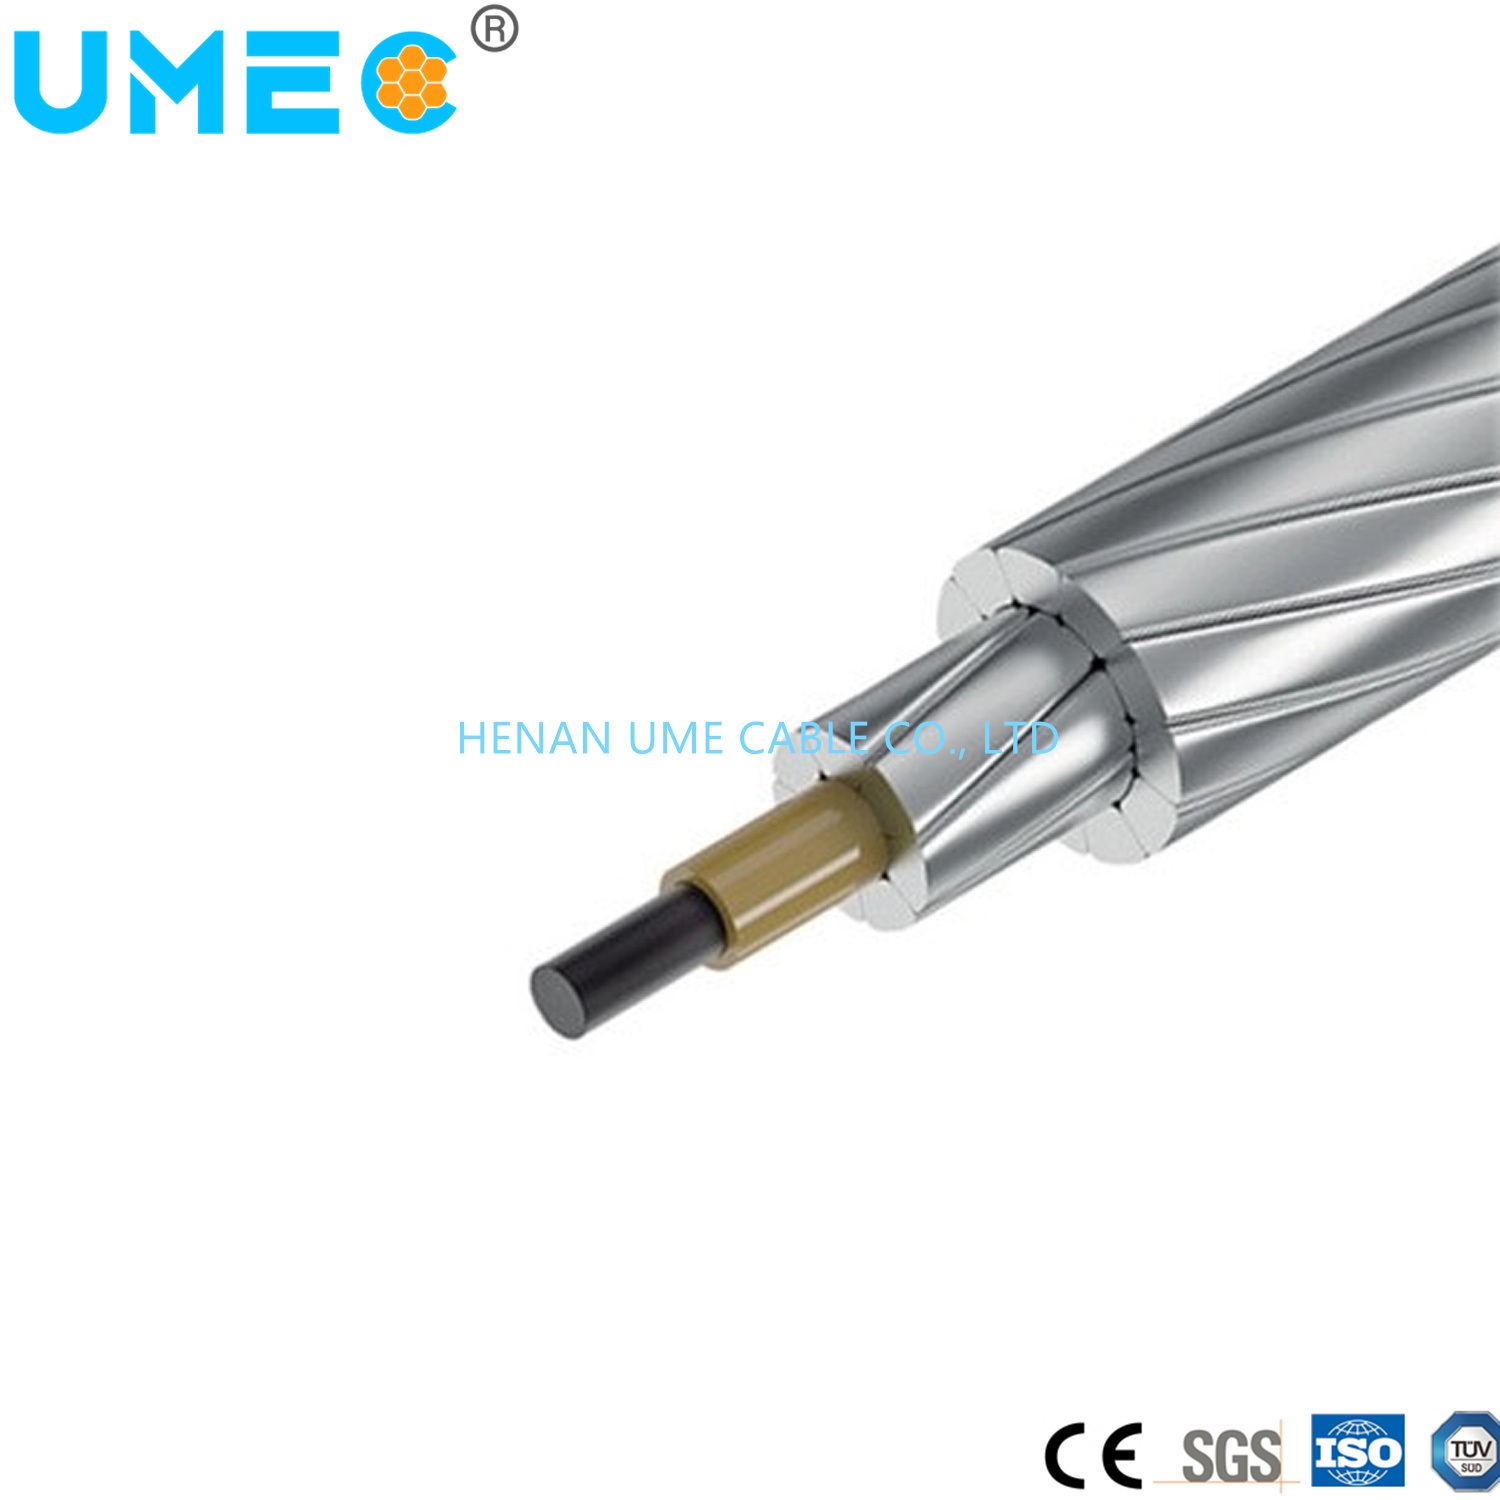 1350-O Annealed Aluminum Conductor Carbon Composite Core High Temperature Light Weight Bare Conductor